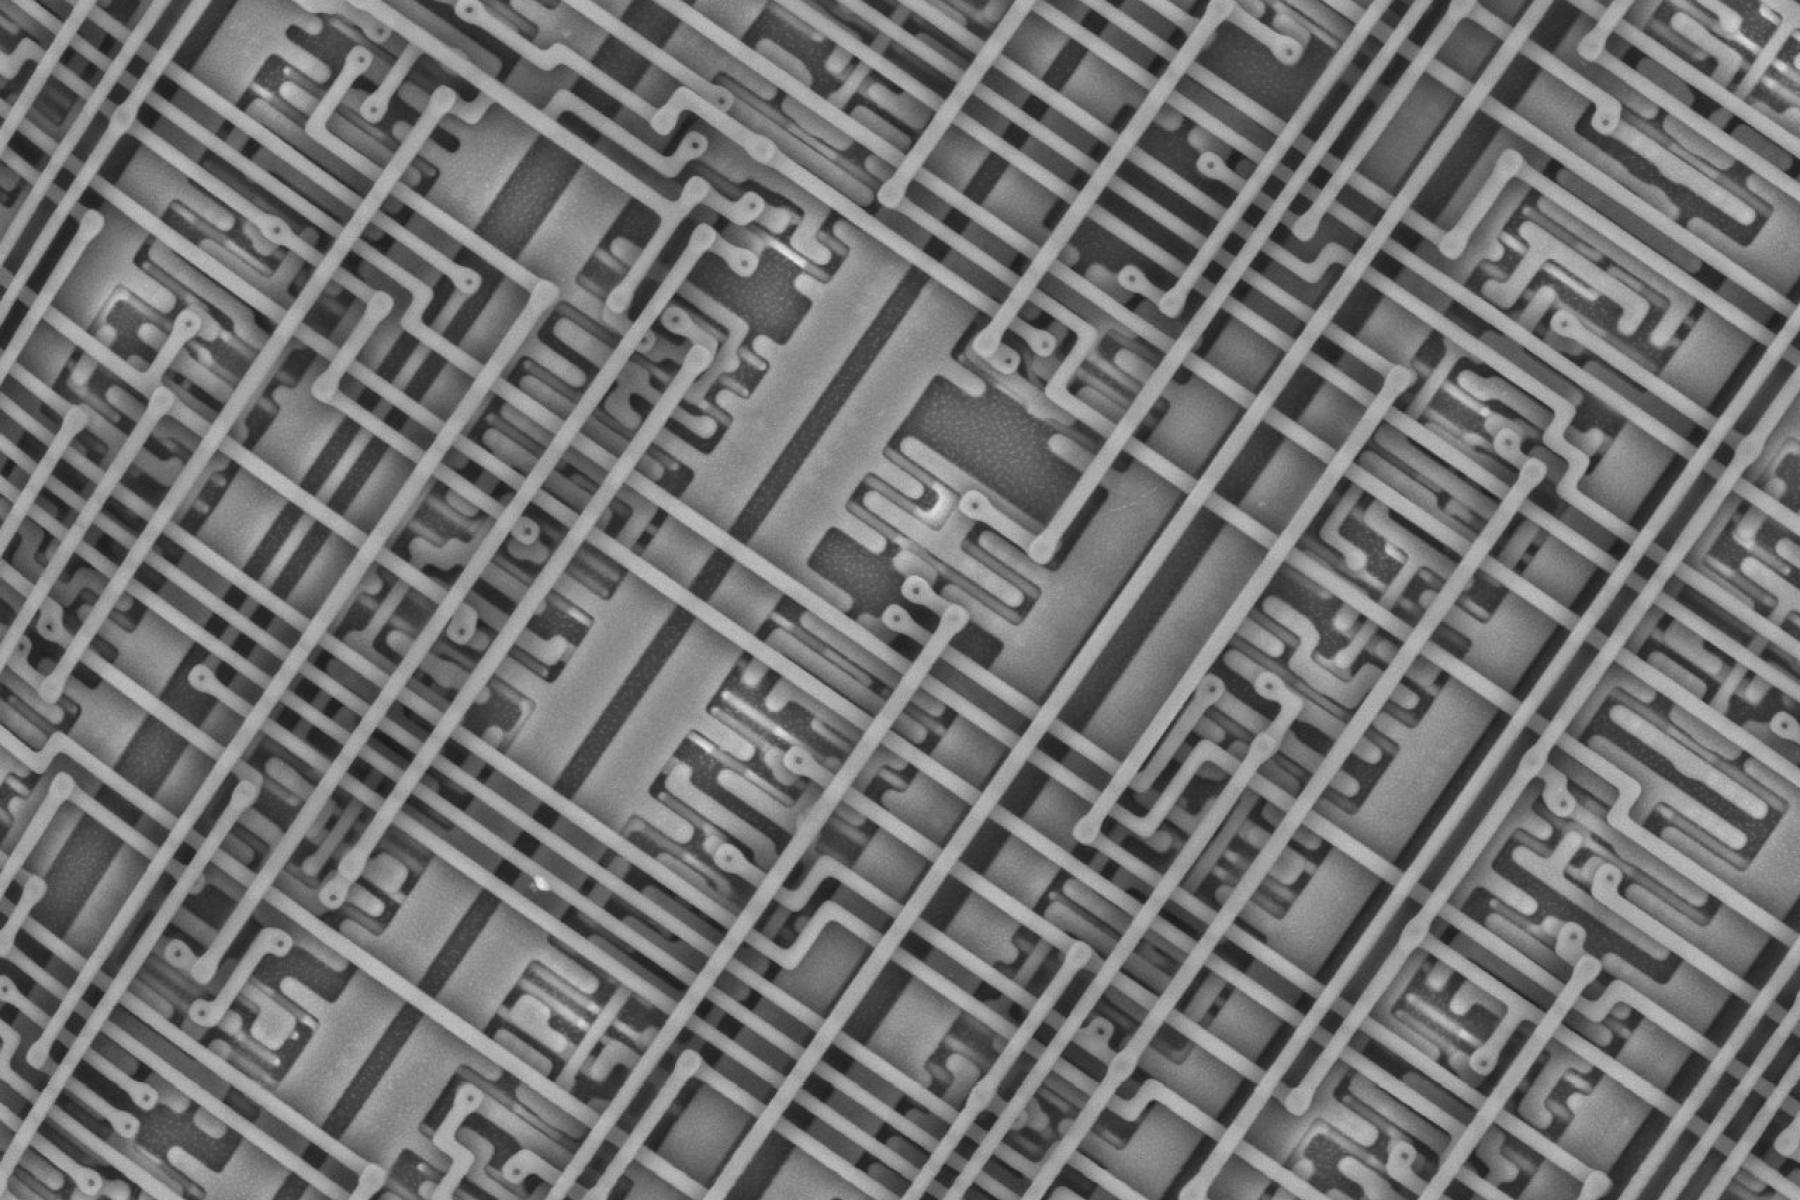 Close up magnified image of a microchip